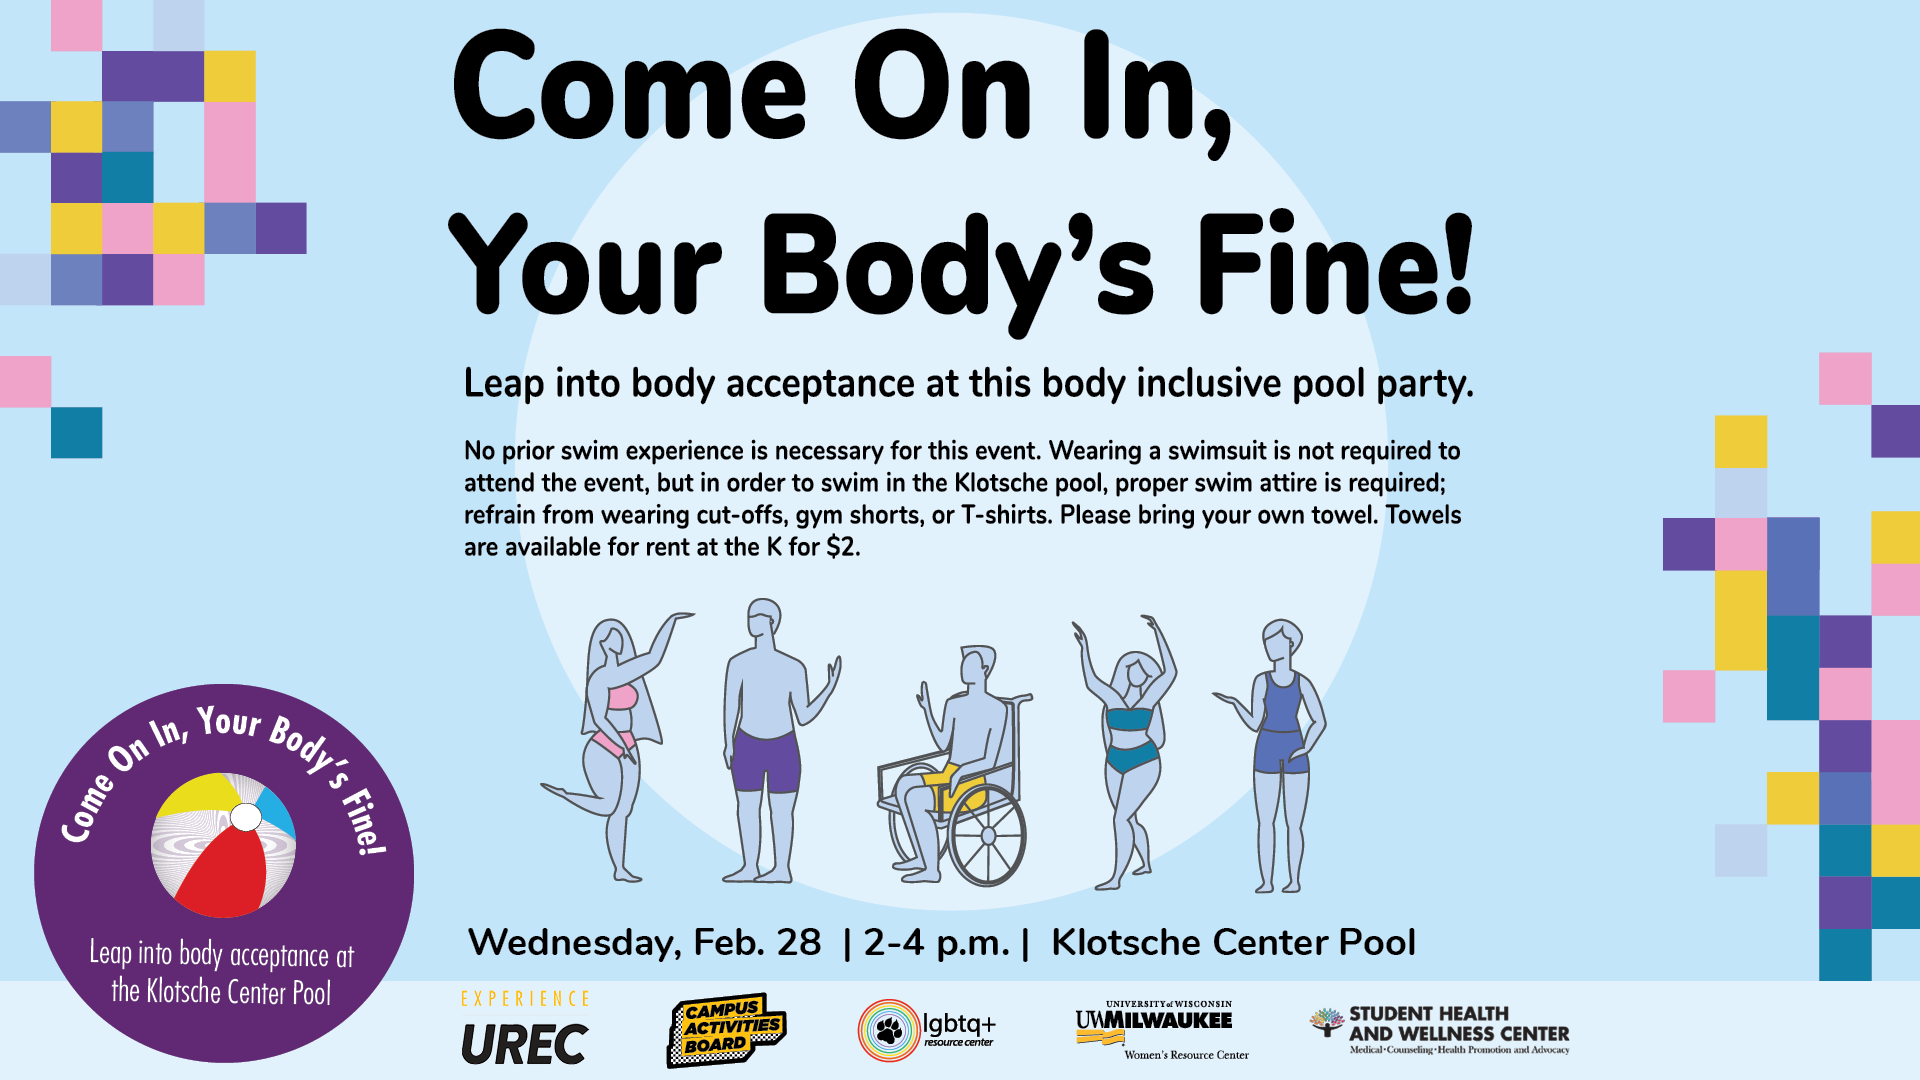 A flyer for an event about a body positivity pool party in the Klotsche Center Pool